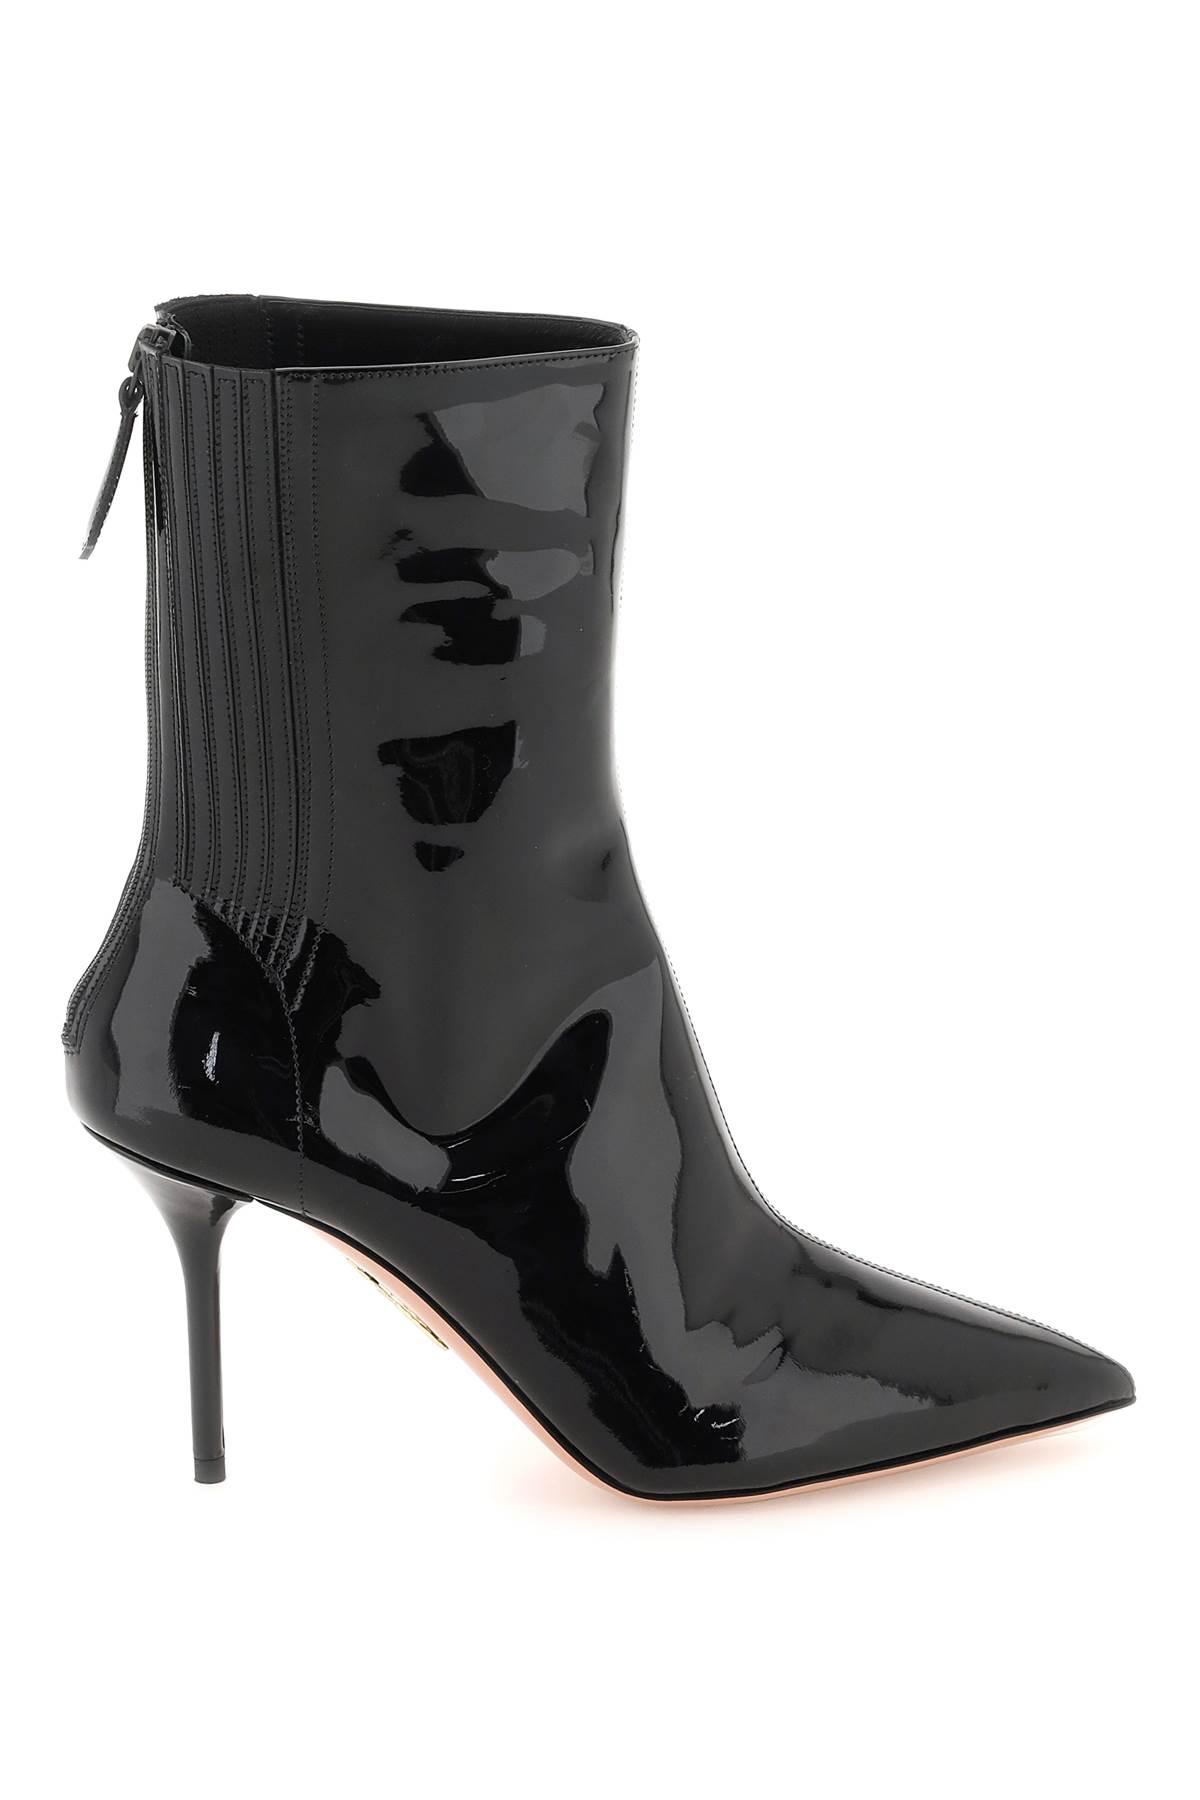 Aquazzura Saint Honore' Patent Leather Ankle Boots in Black | Lyst